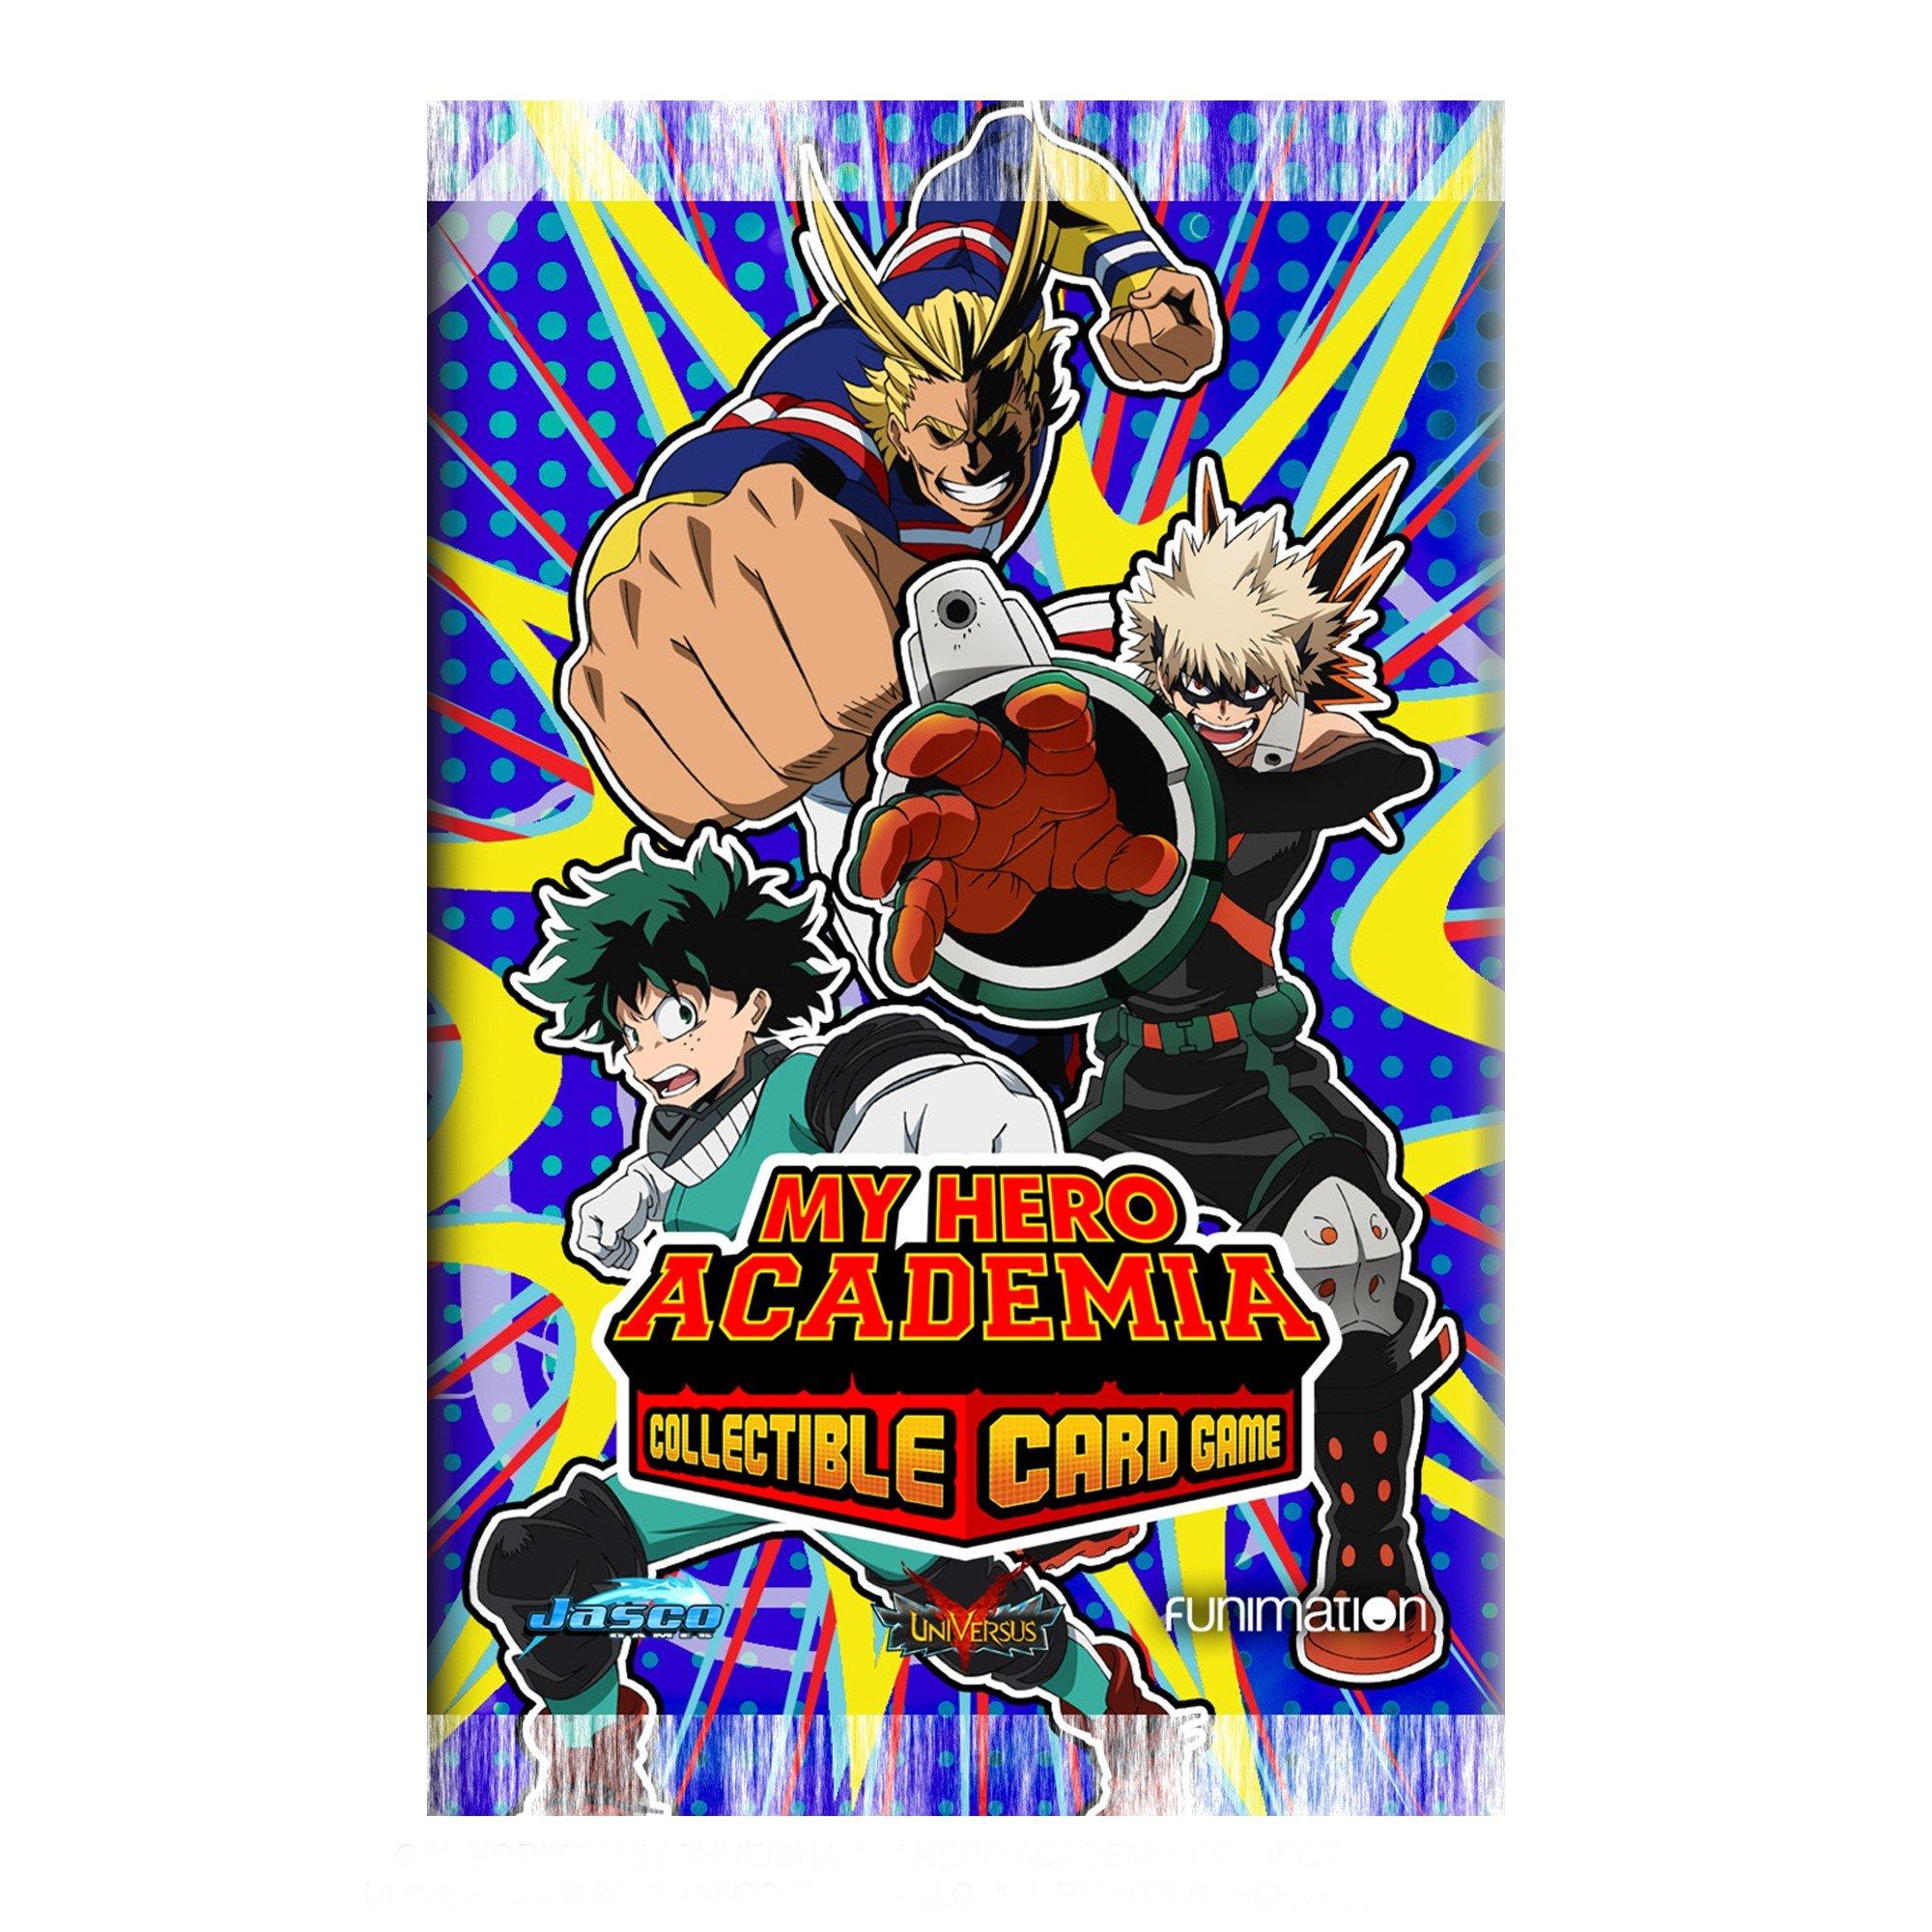 My Hero Academia Collectible Card Game Booster Pack Wave 1 | GameStop